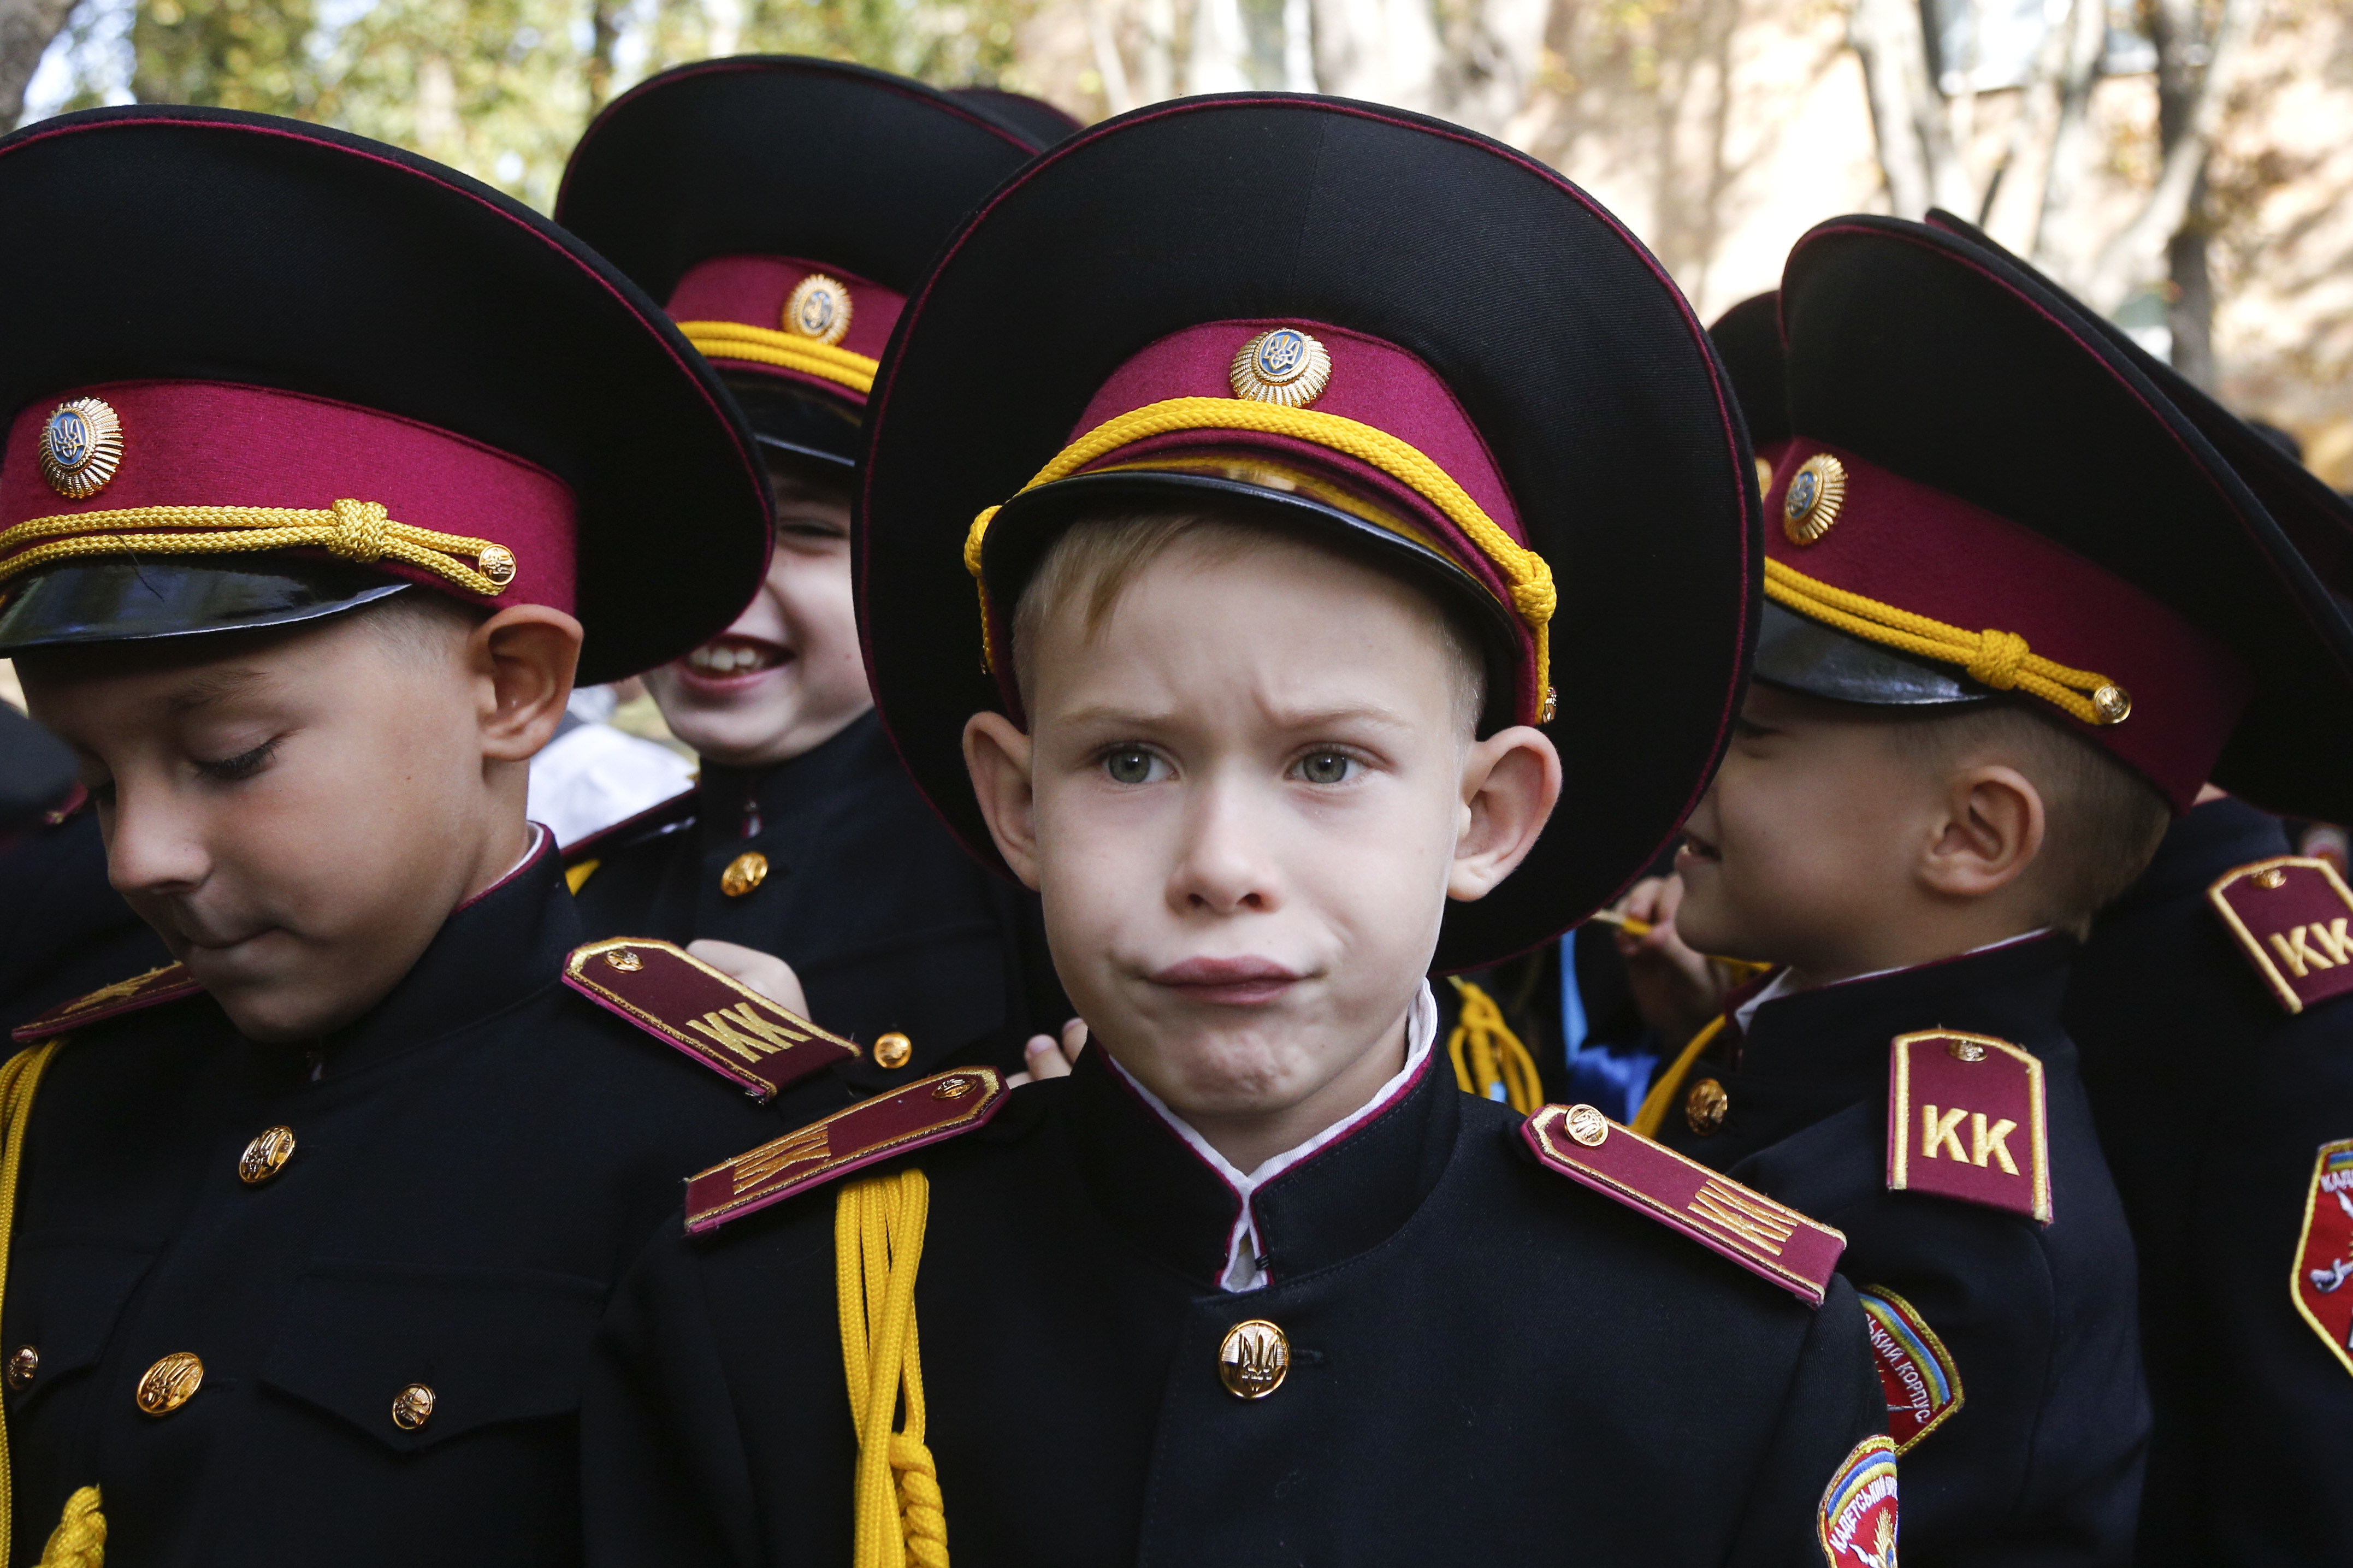 Young cadets attend a ceremony on the occasion of the first day of school at a cadet lyceum in Kiev, Ukraine, Friday, Sept. 1, 2017. Ukraine marks Sept. 1 as Knowledge Day, as a traditional launch of the academic year. (AP Photo/Efrem Lukatsky)